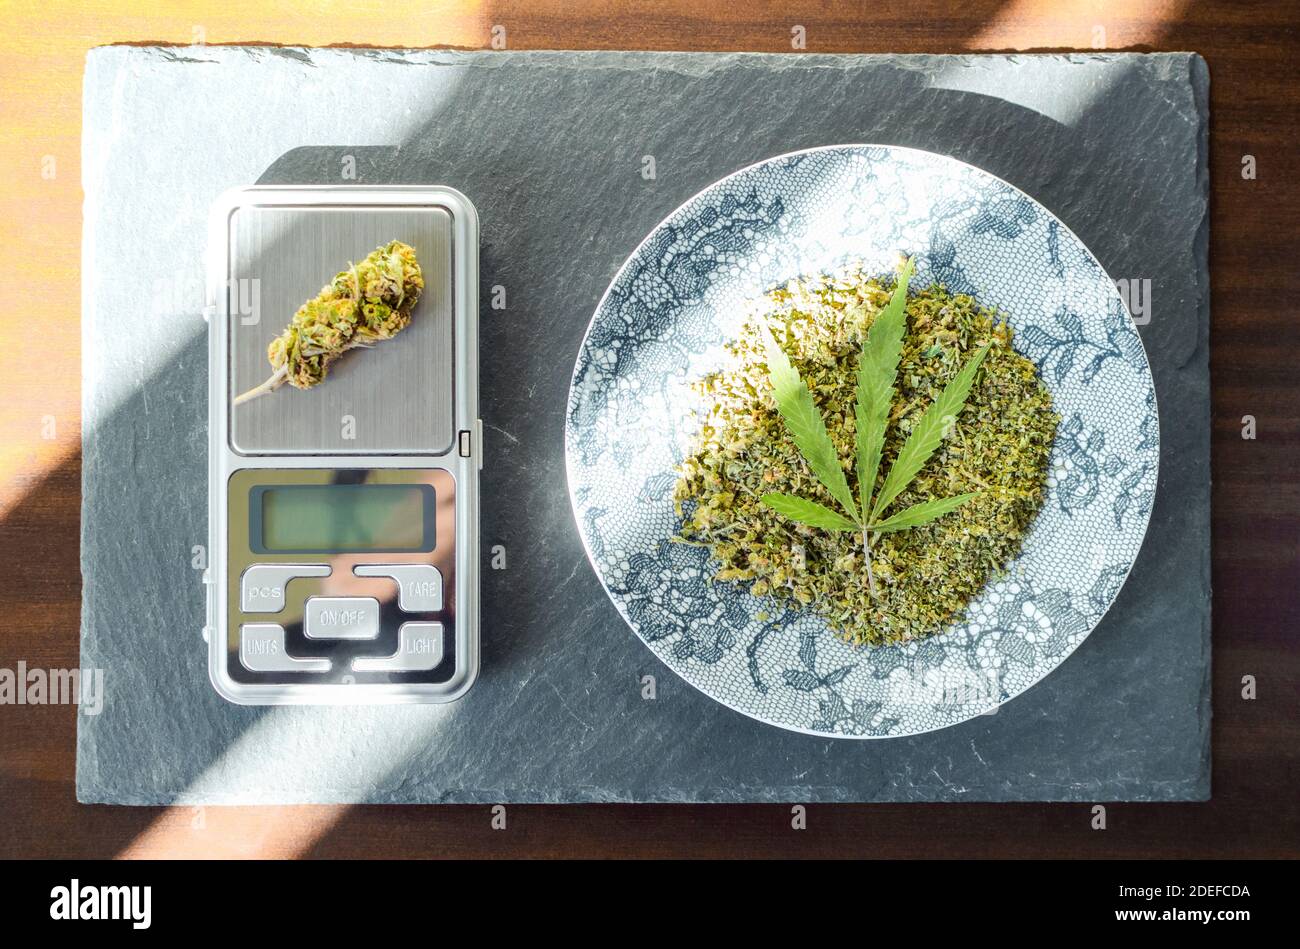 https://c8.alamy.com/comp/2DEFCDA/tray-with-marijuana-and-digital-scale-with-cannabis-bud-top-view-of-wooden-table-with-sun-rays-2DEFCDA.jpg